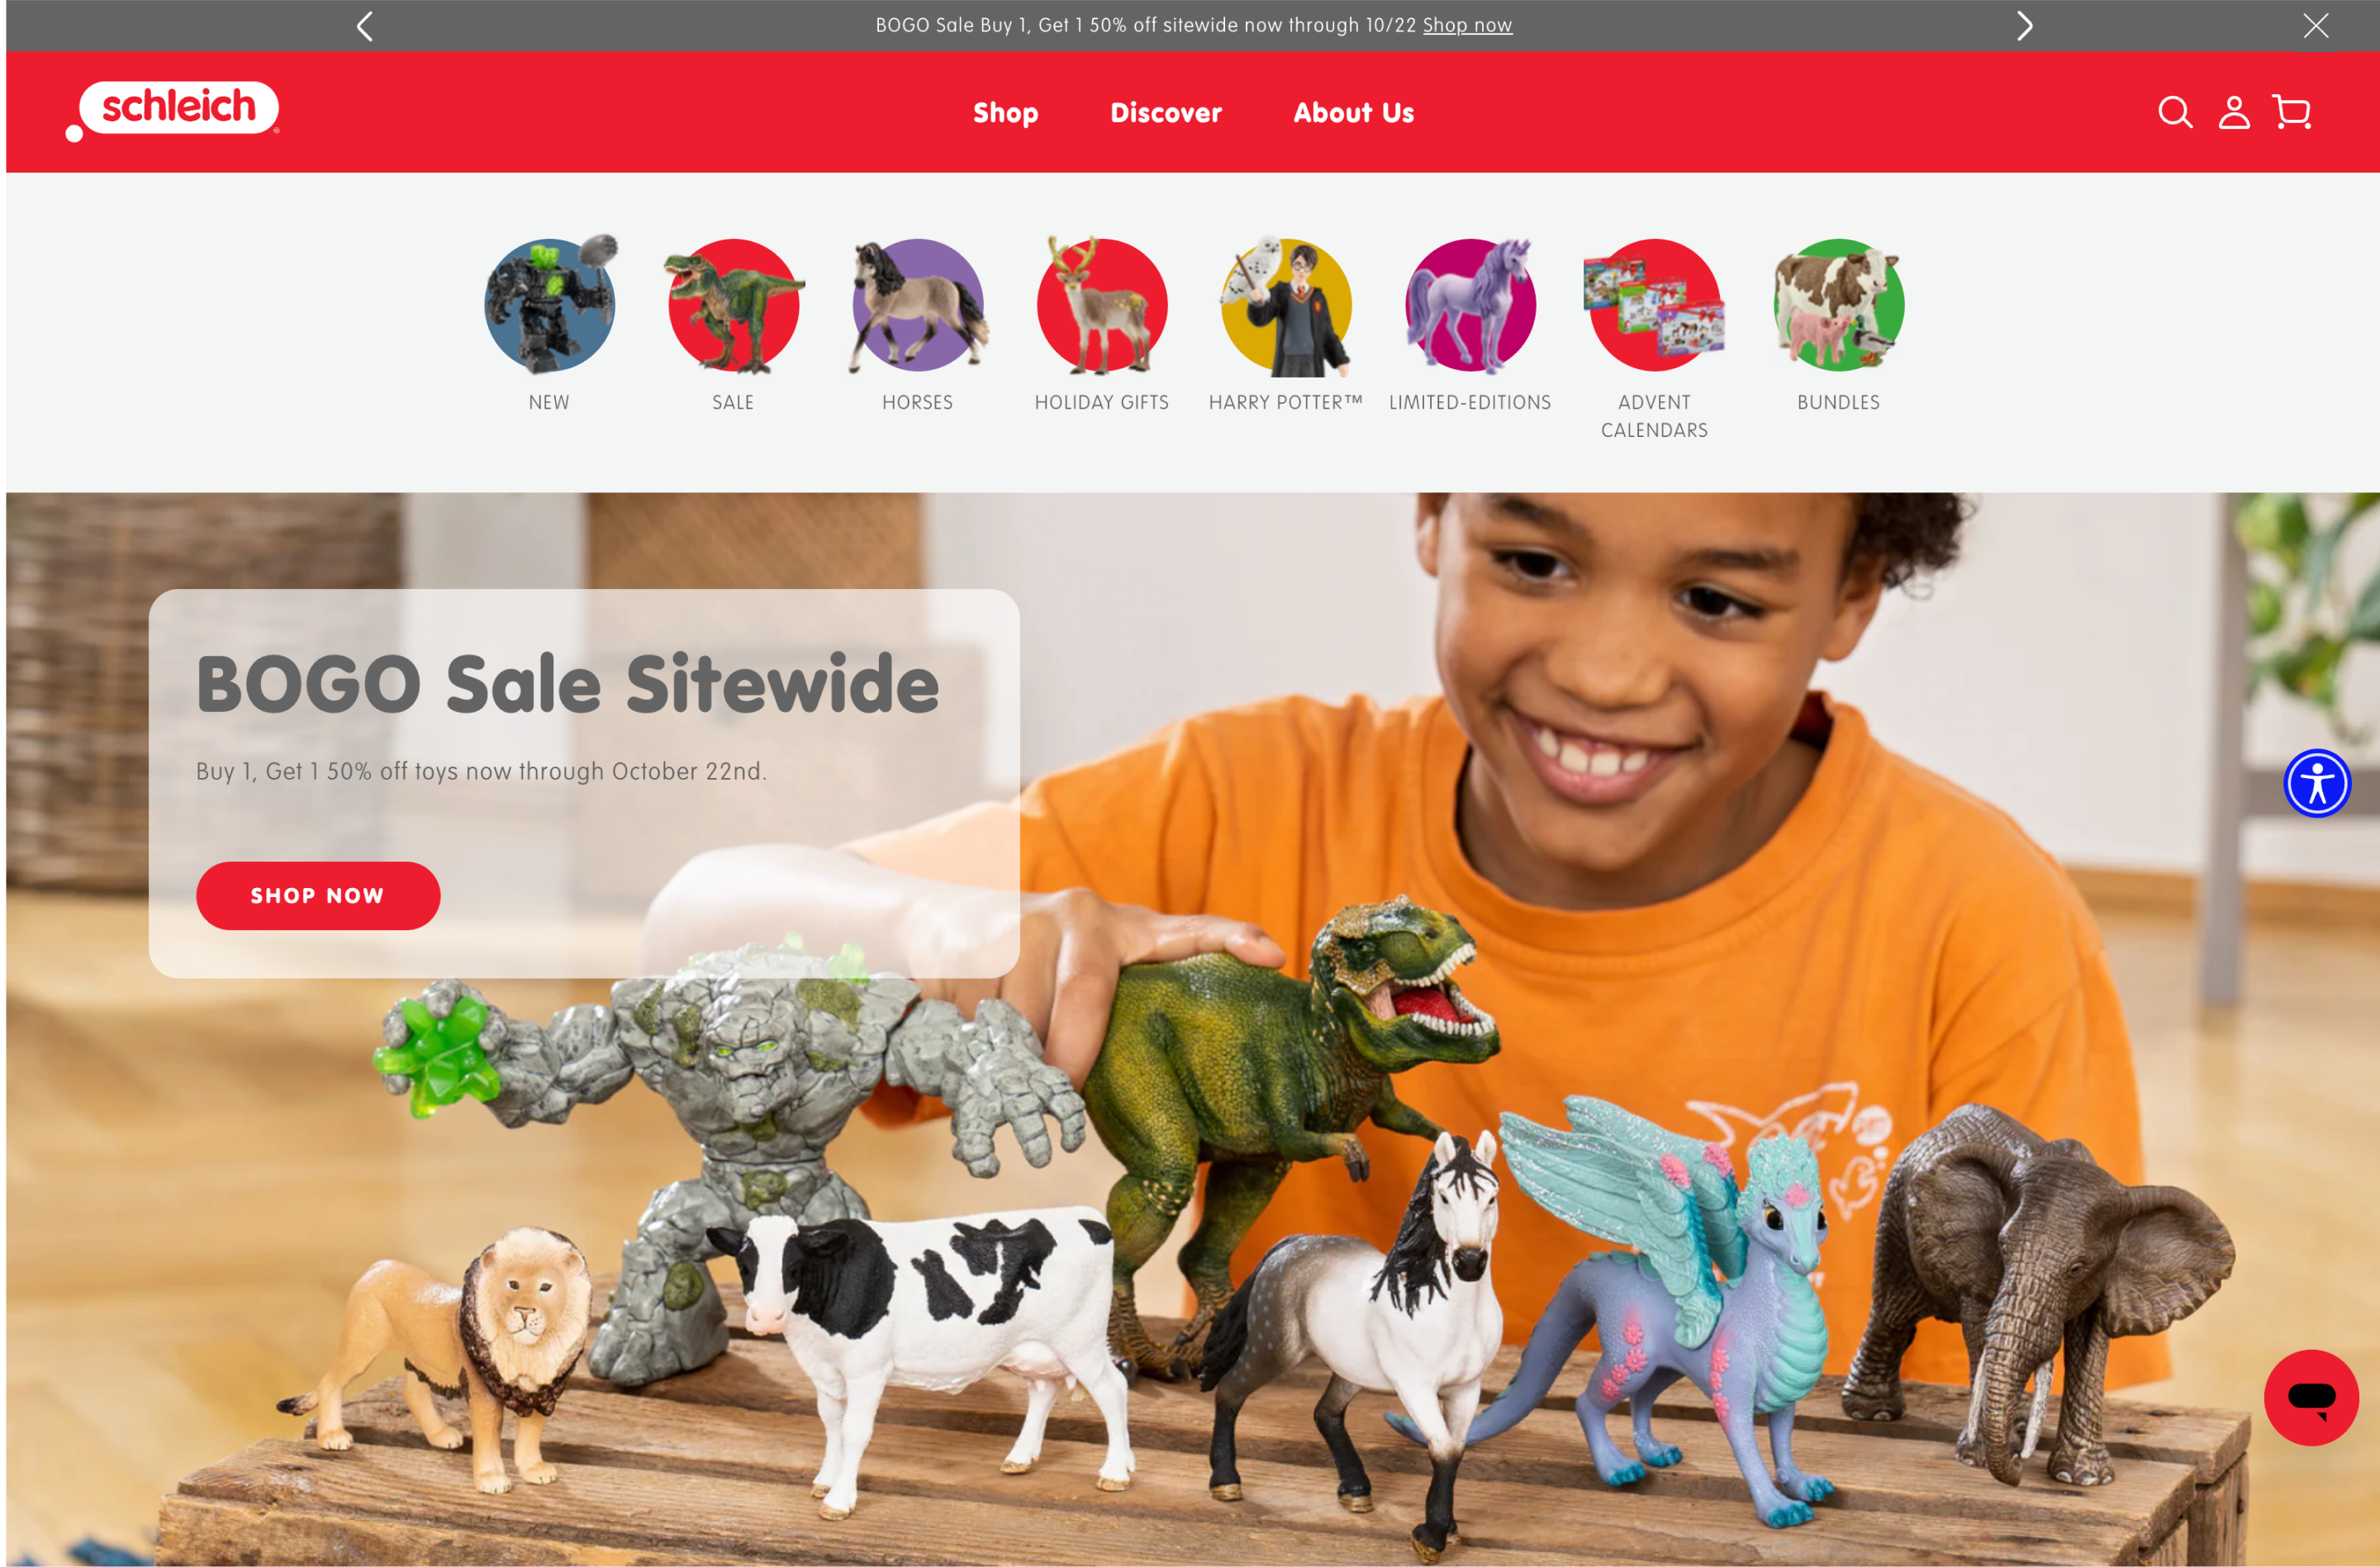 Desktop screenshot of boy playing with various Schleich figurines